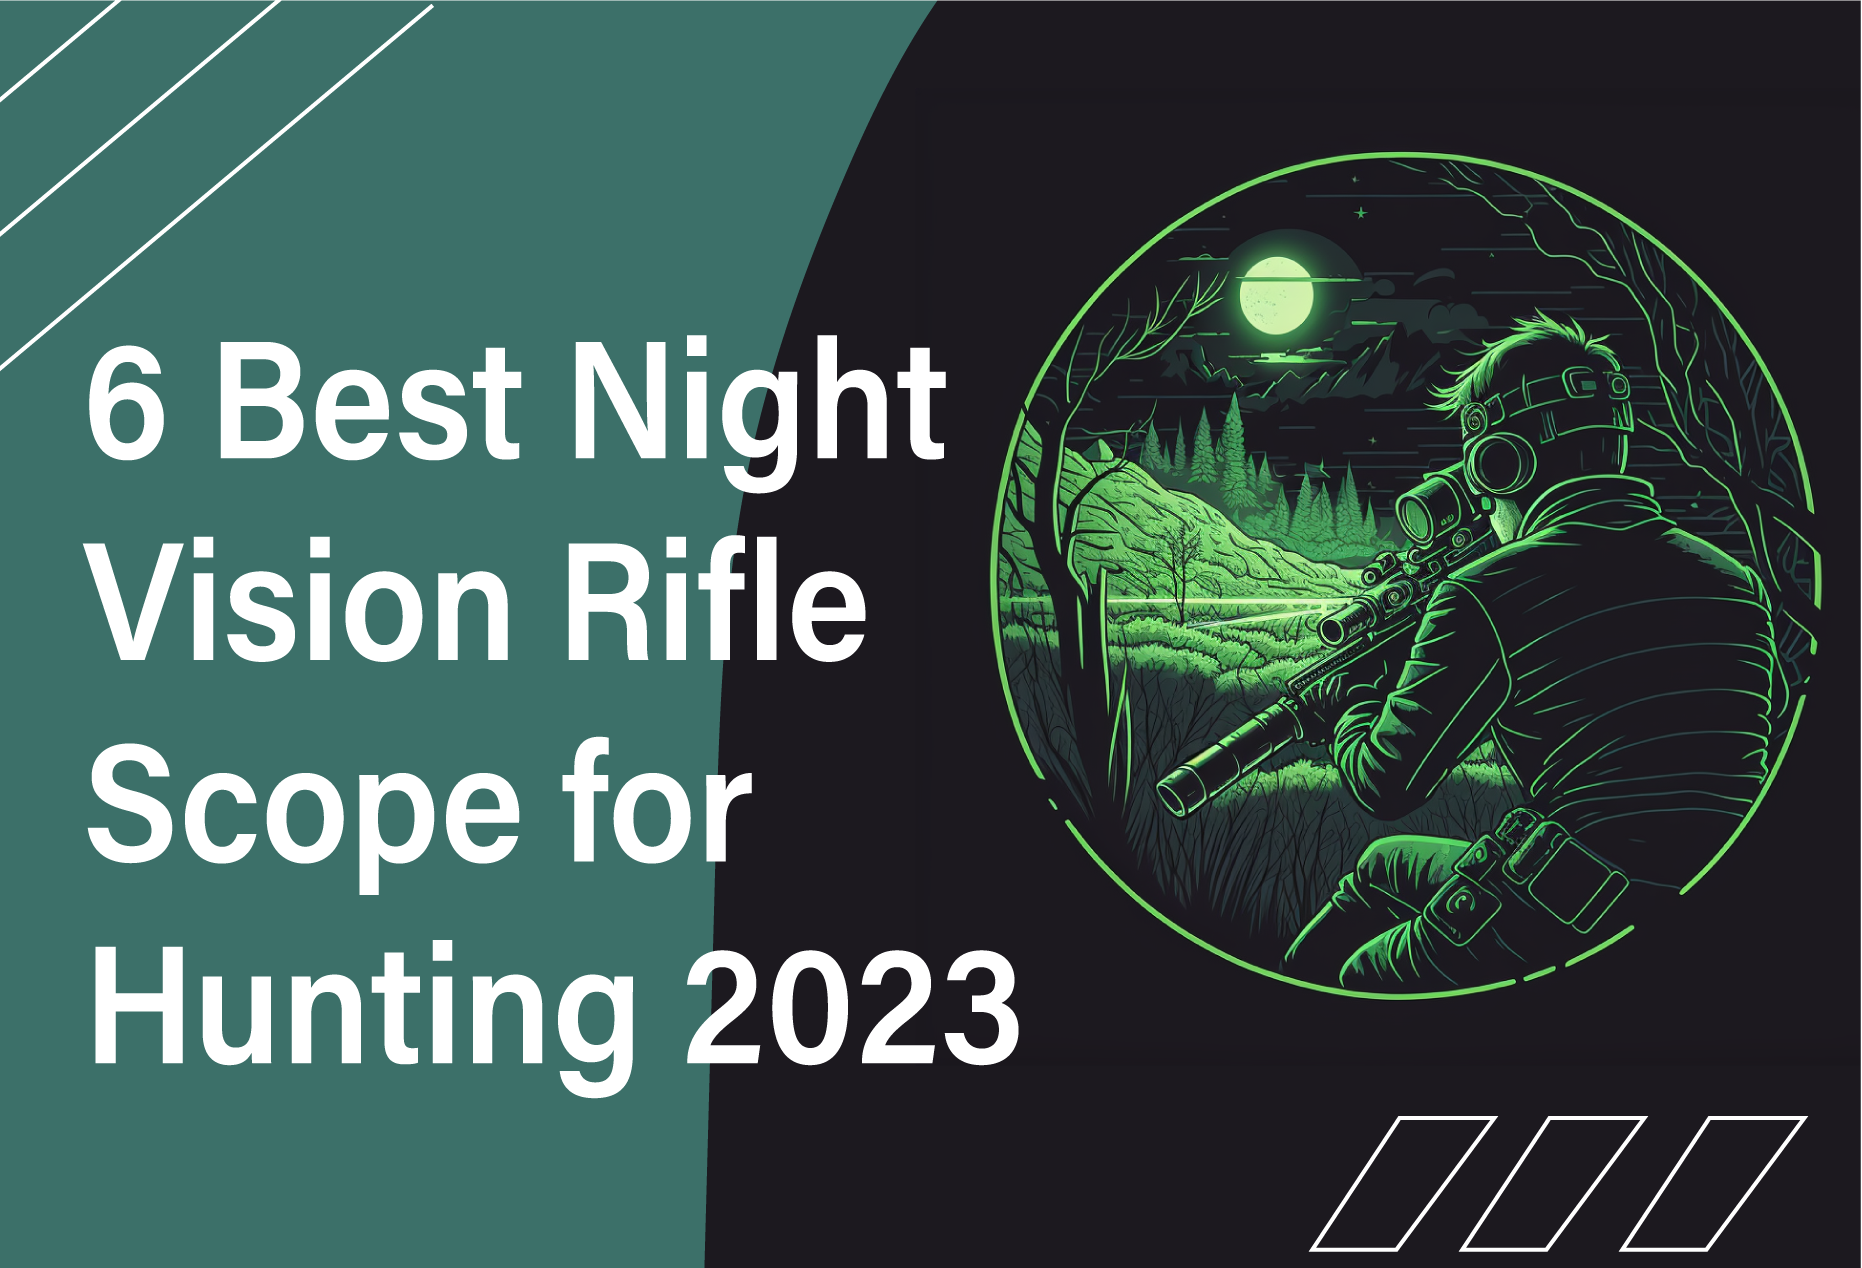 6 Best Night Vision Rifle Scope for Hunting 2023